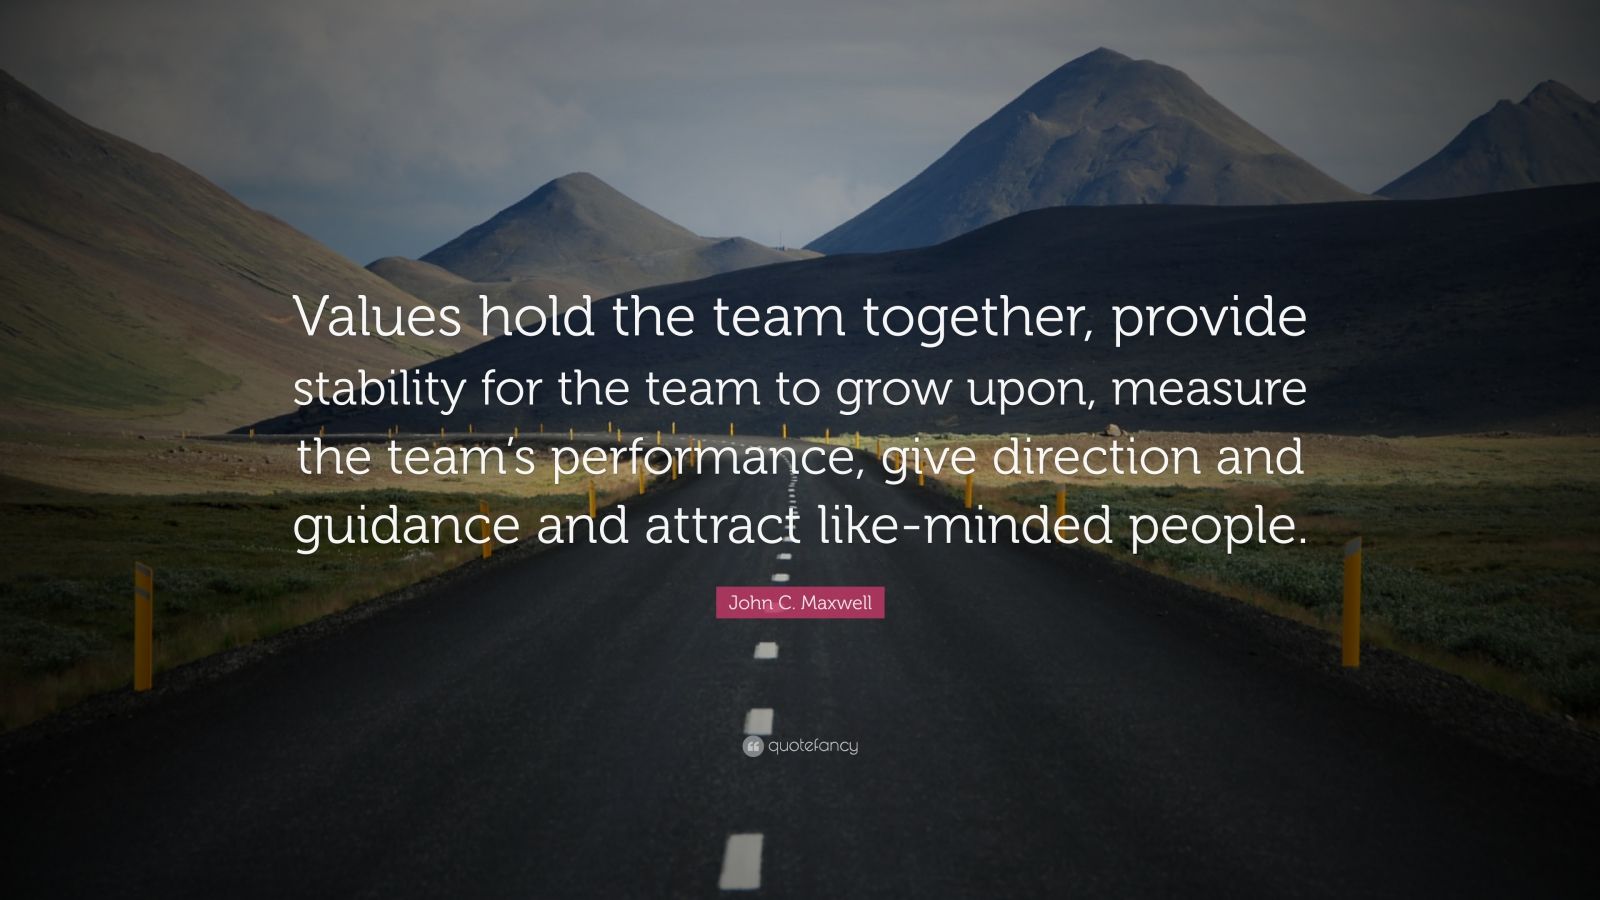 John C. Maxwell Quote: “Values hold the team together, provide